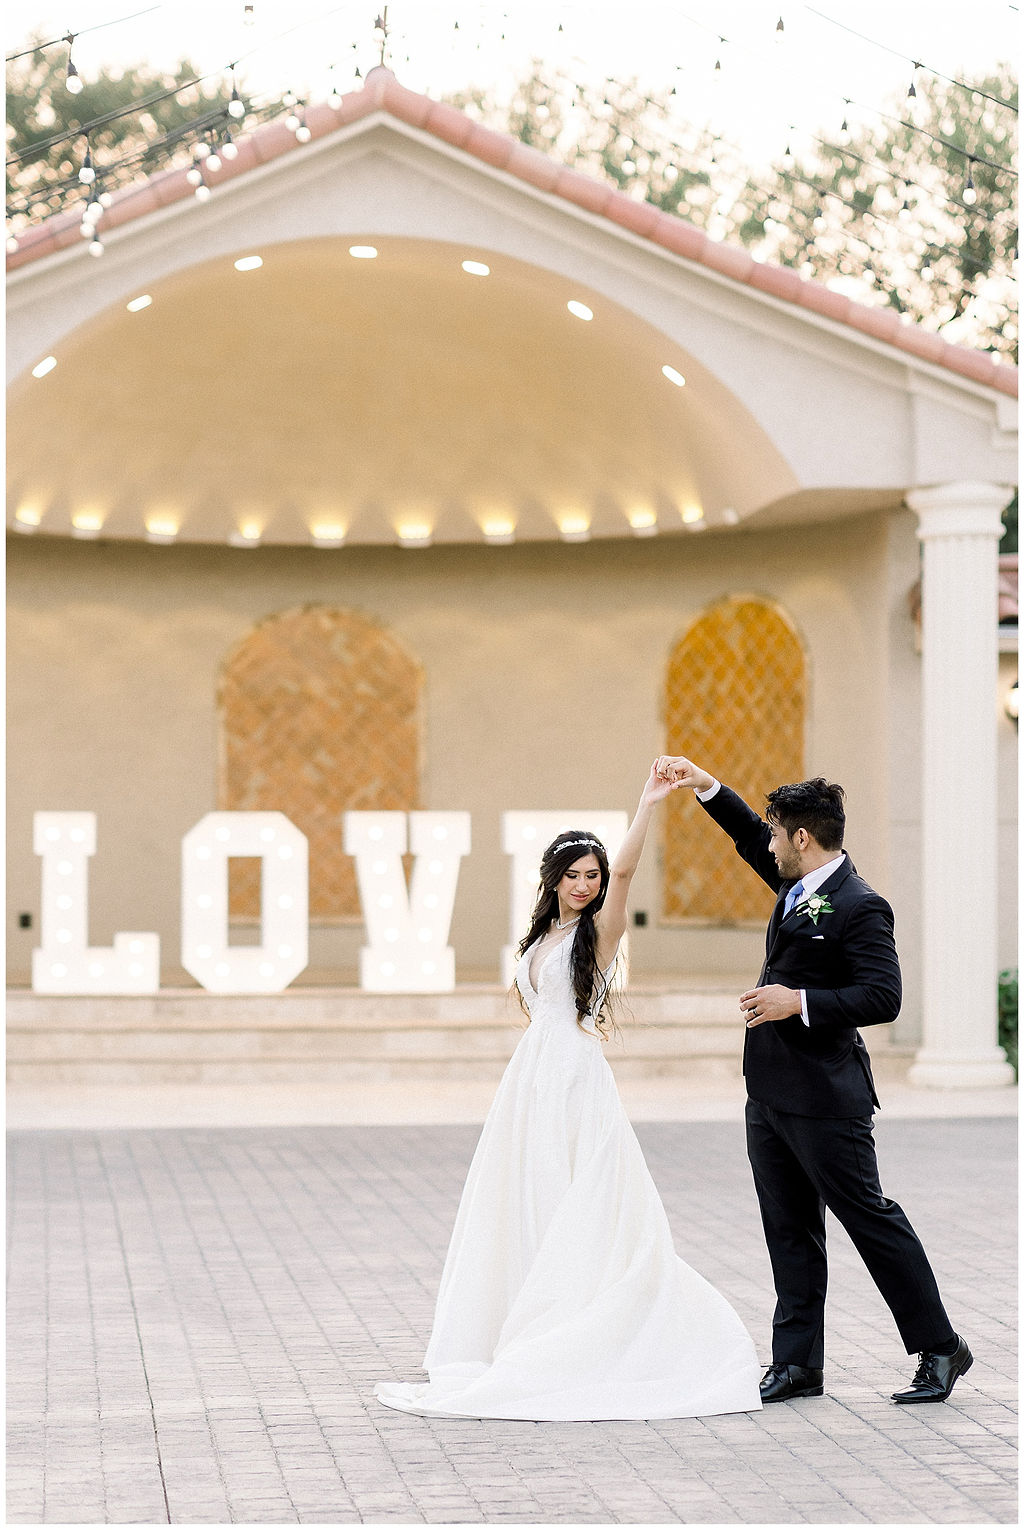 bride and groom dance in front of light up sign